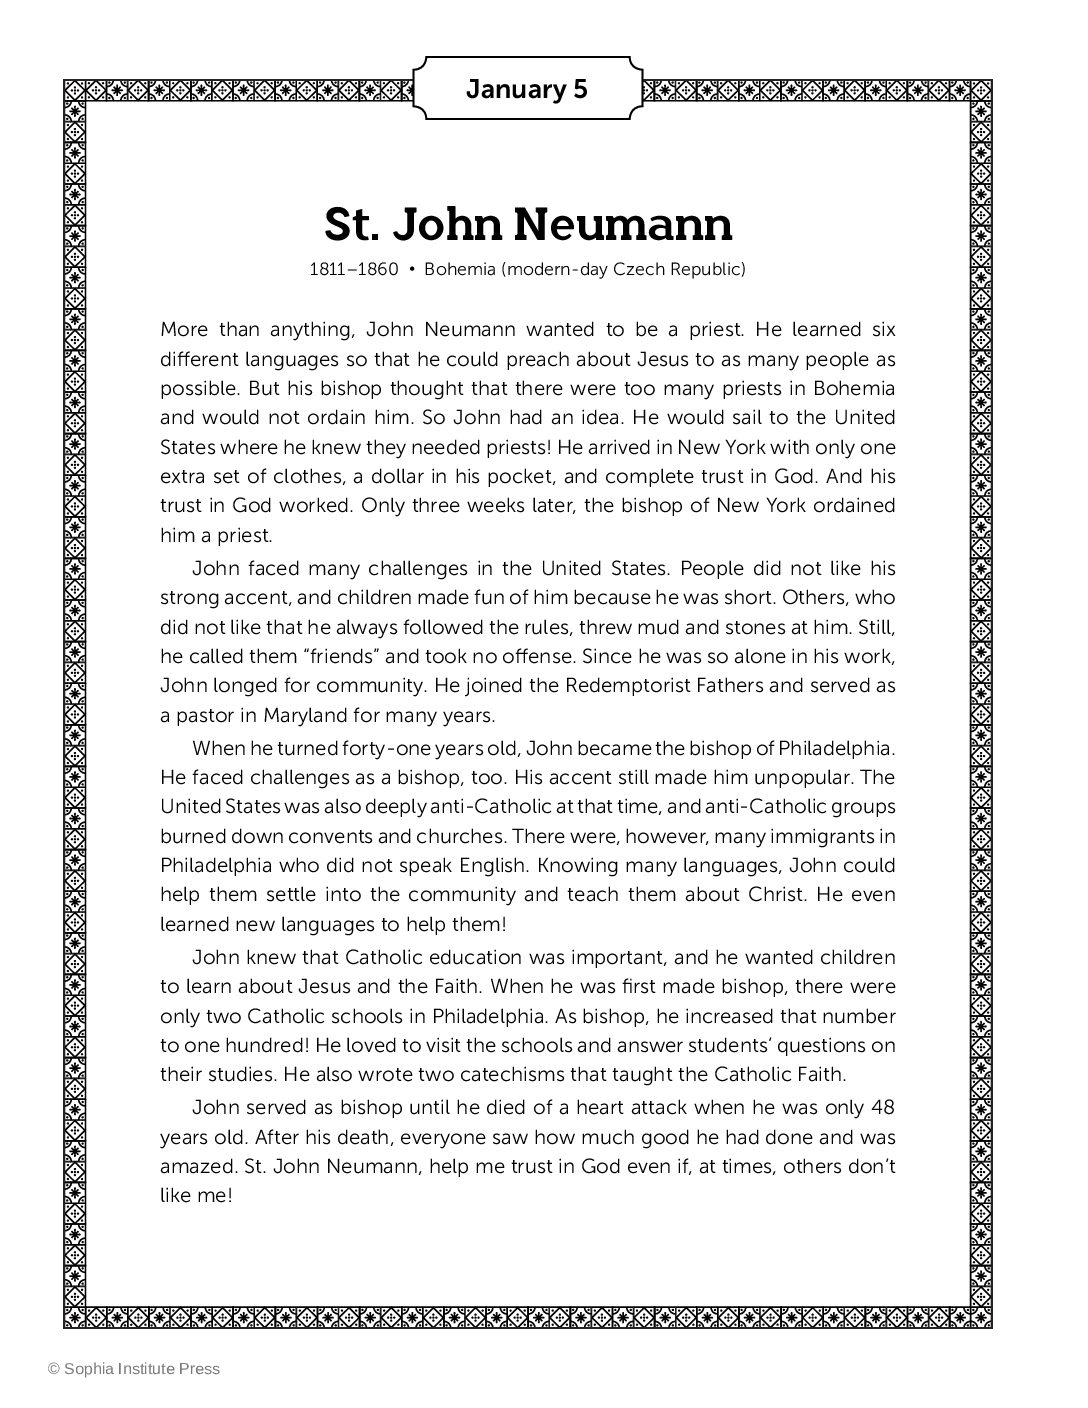 st-john-neumann-bishop-story-and-coloring-page-sophia-teachers